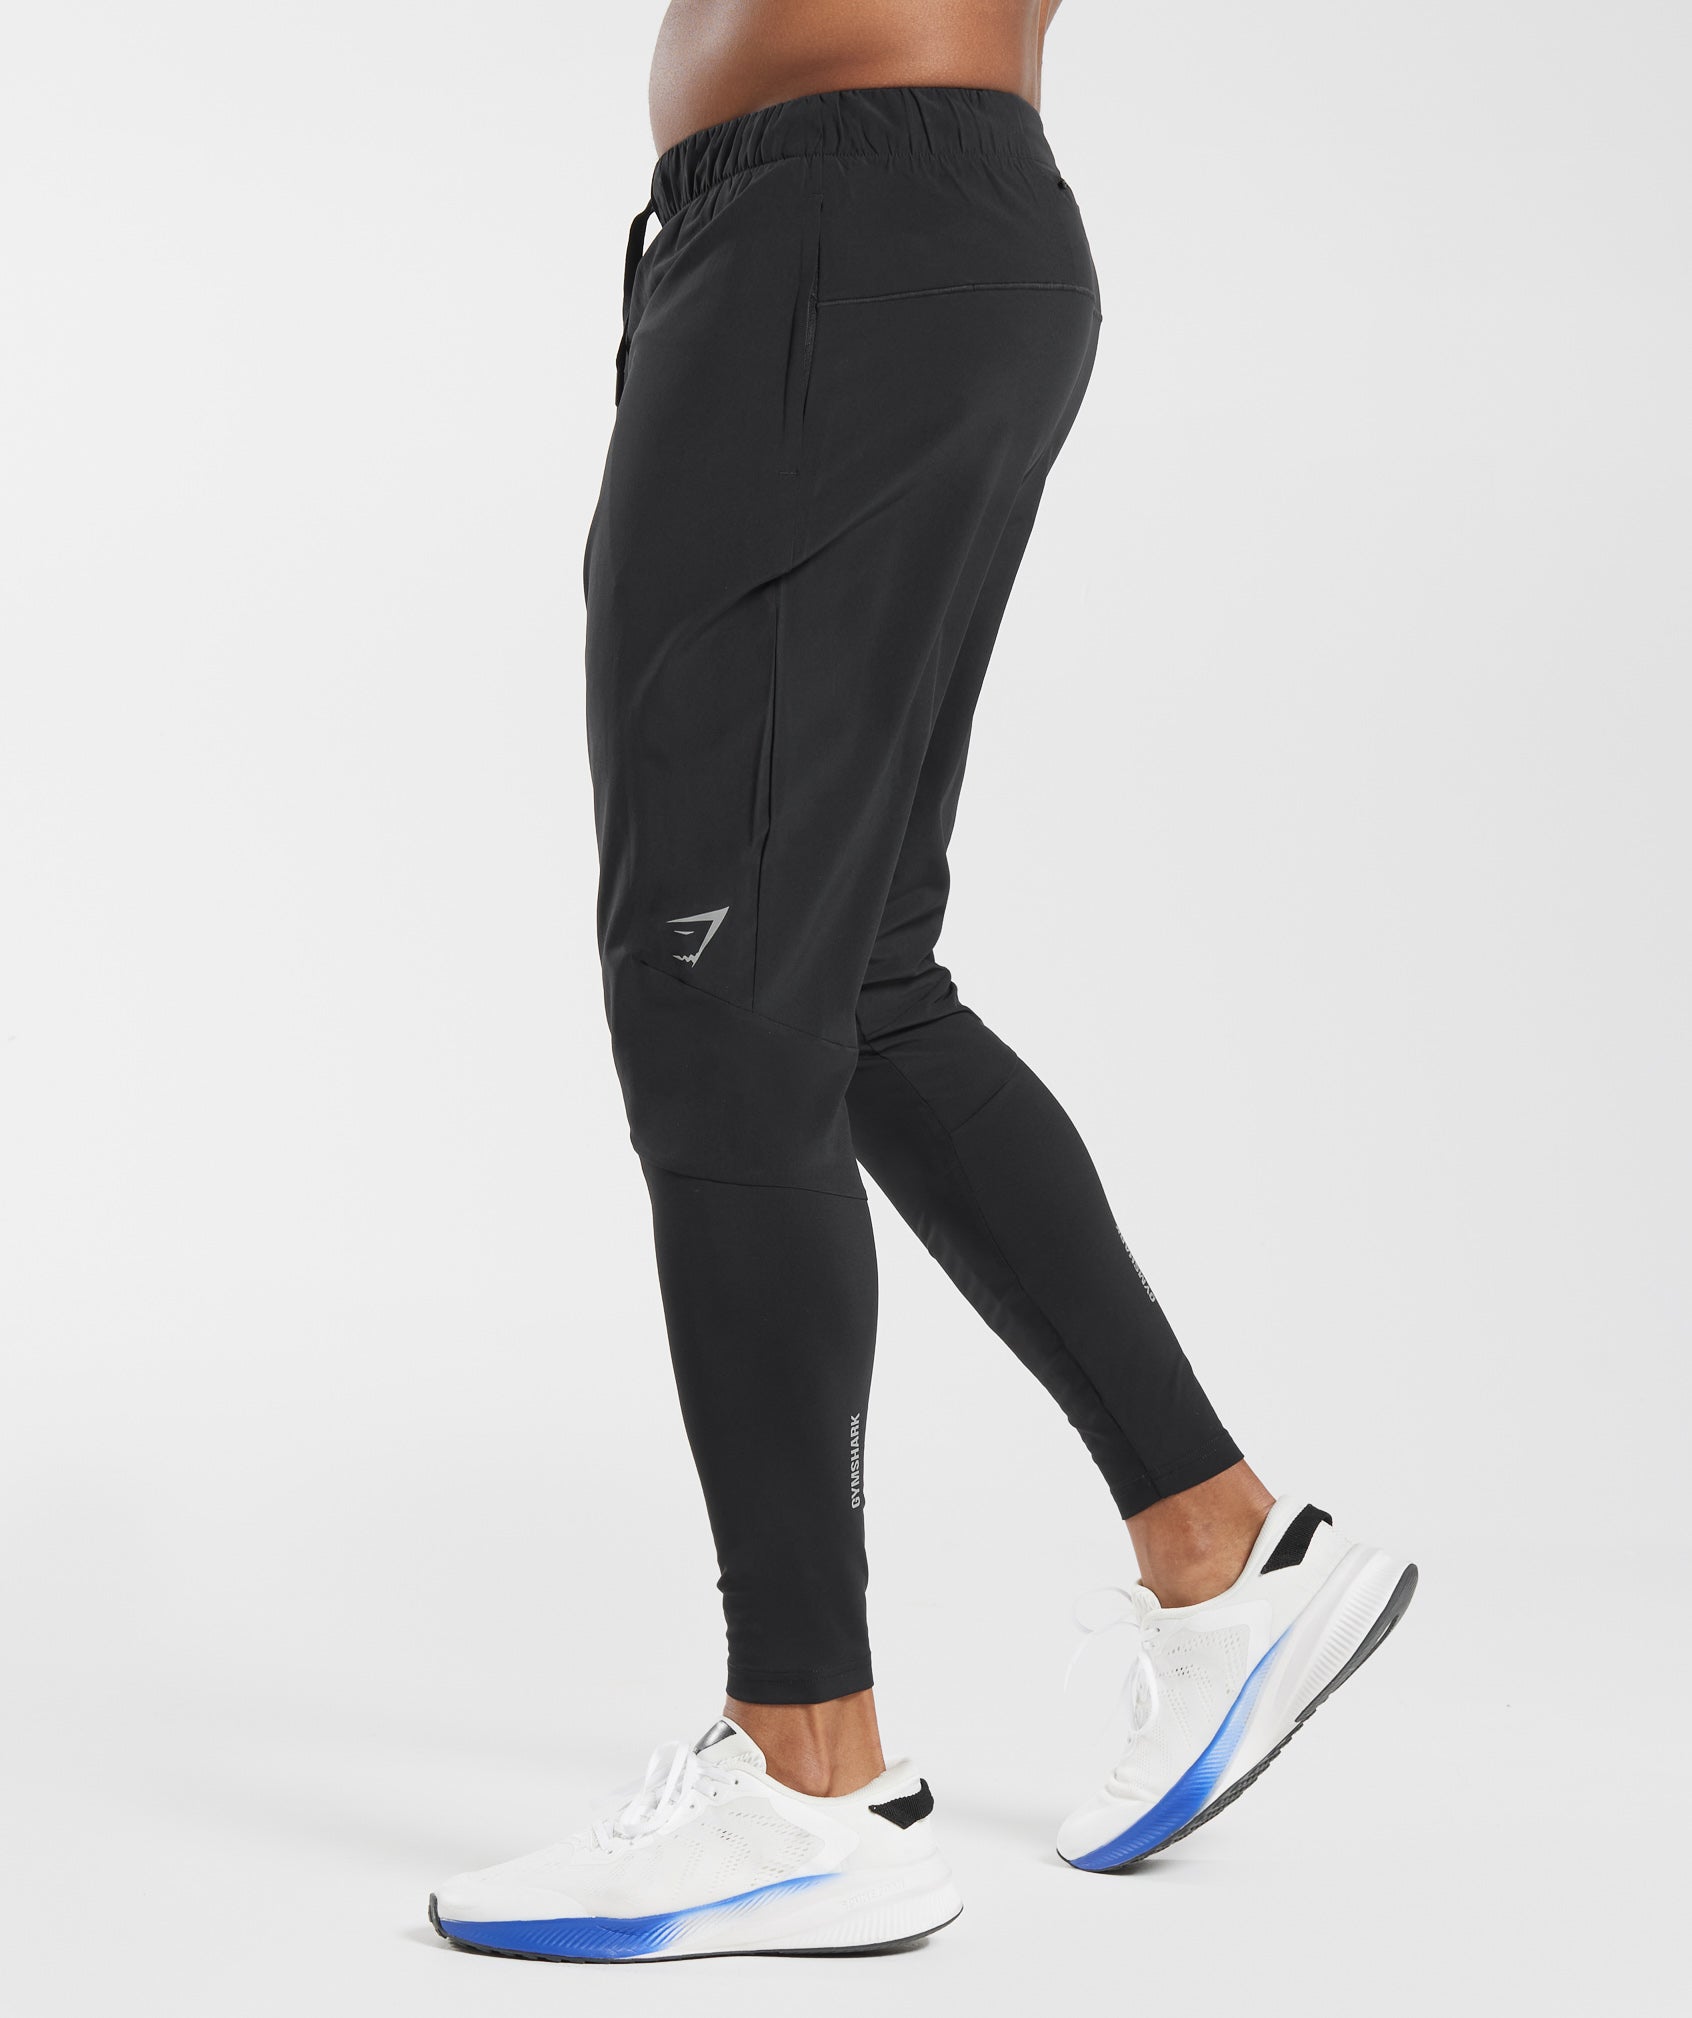 Speed Joggers in Black - view 3